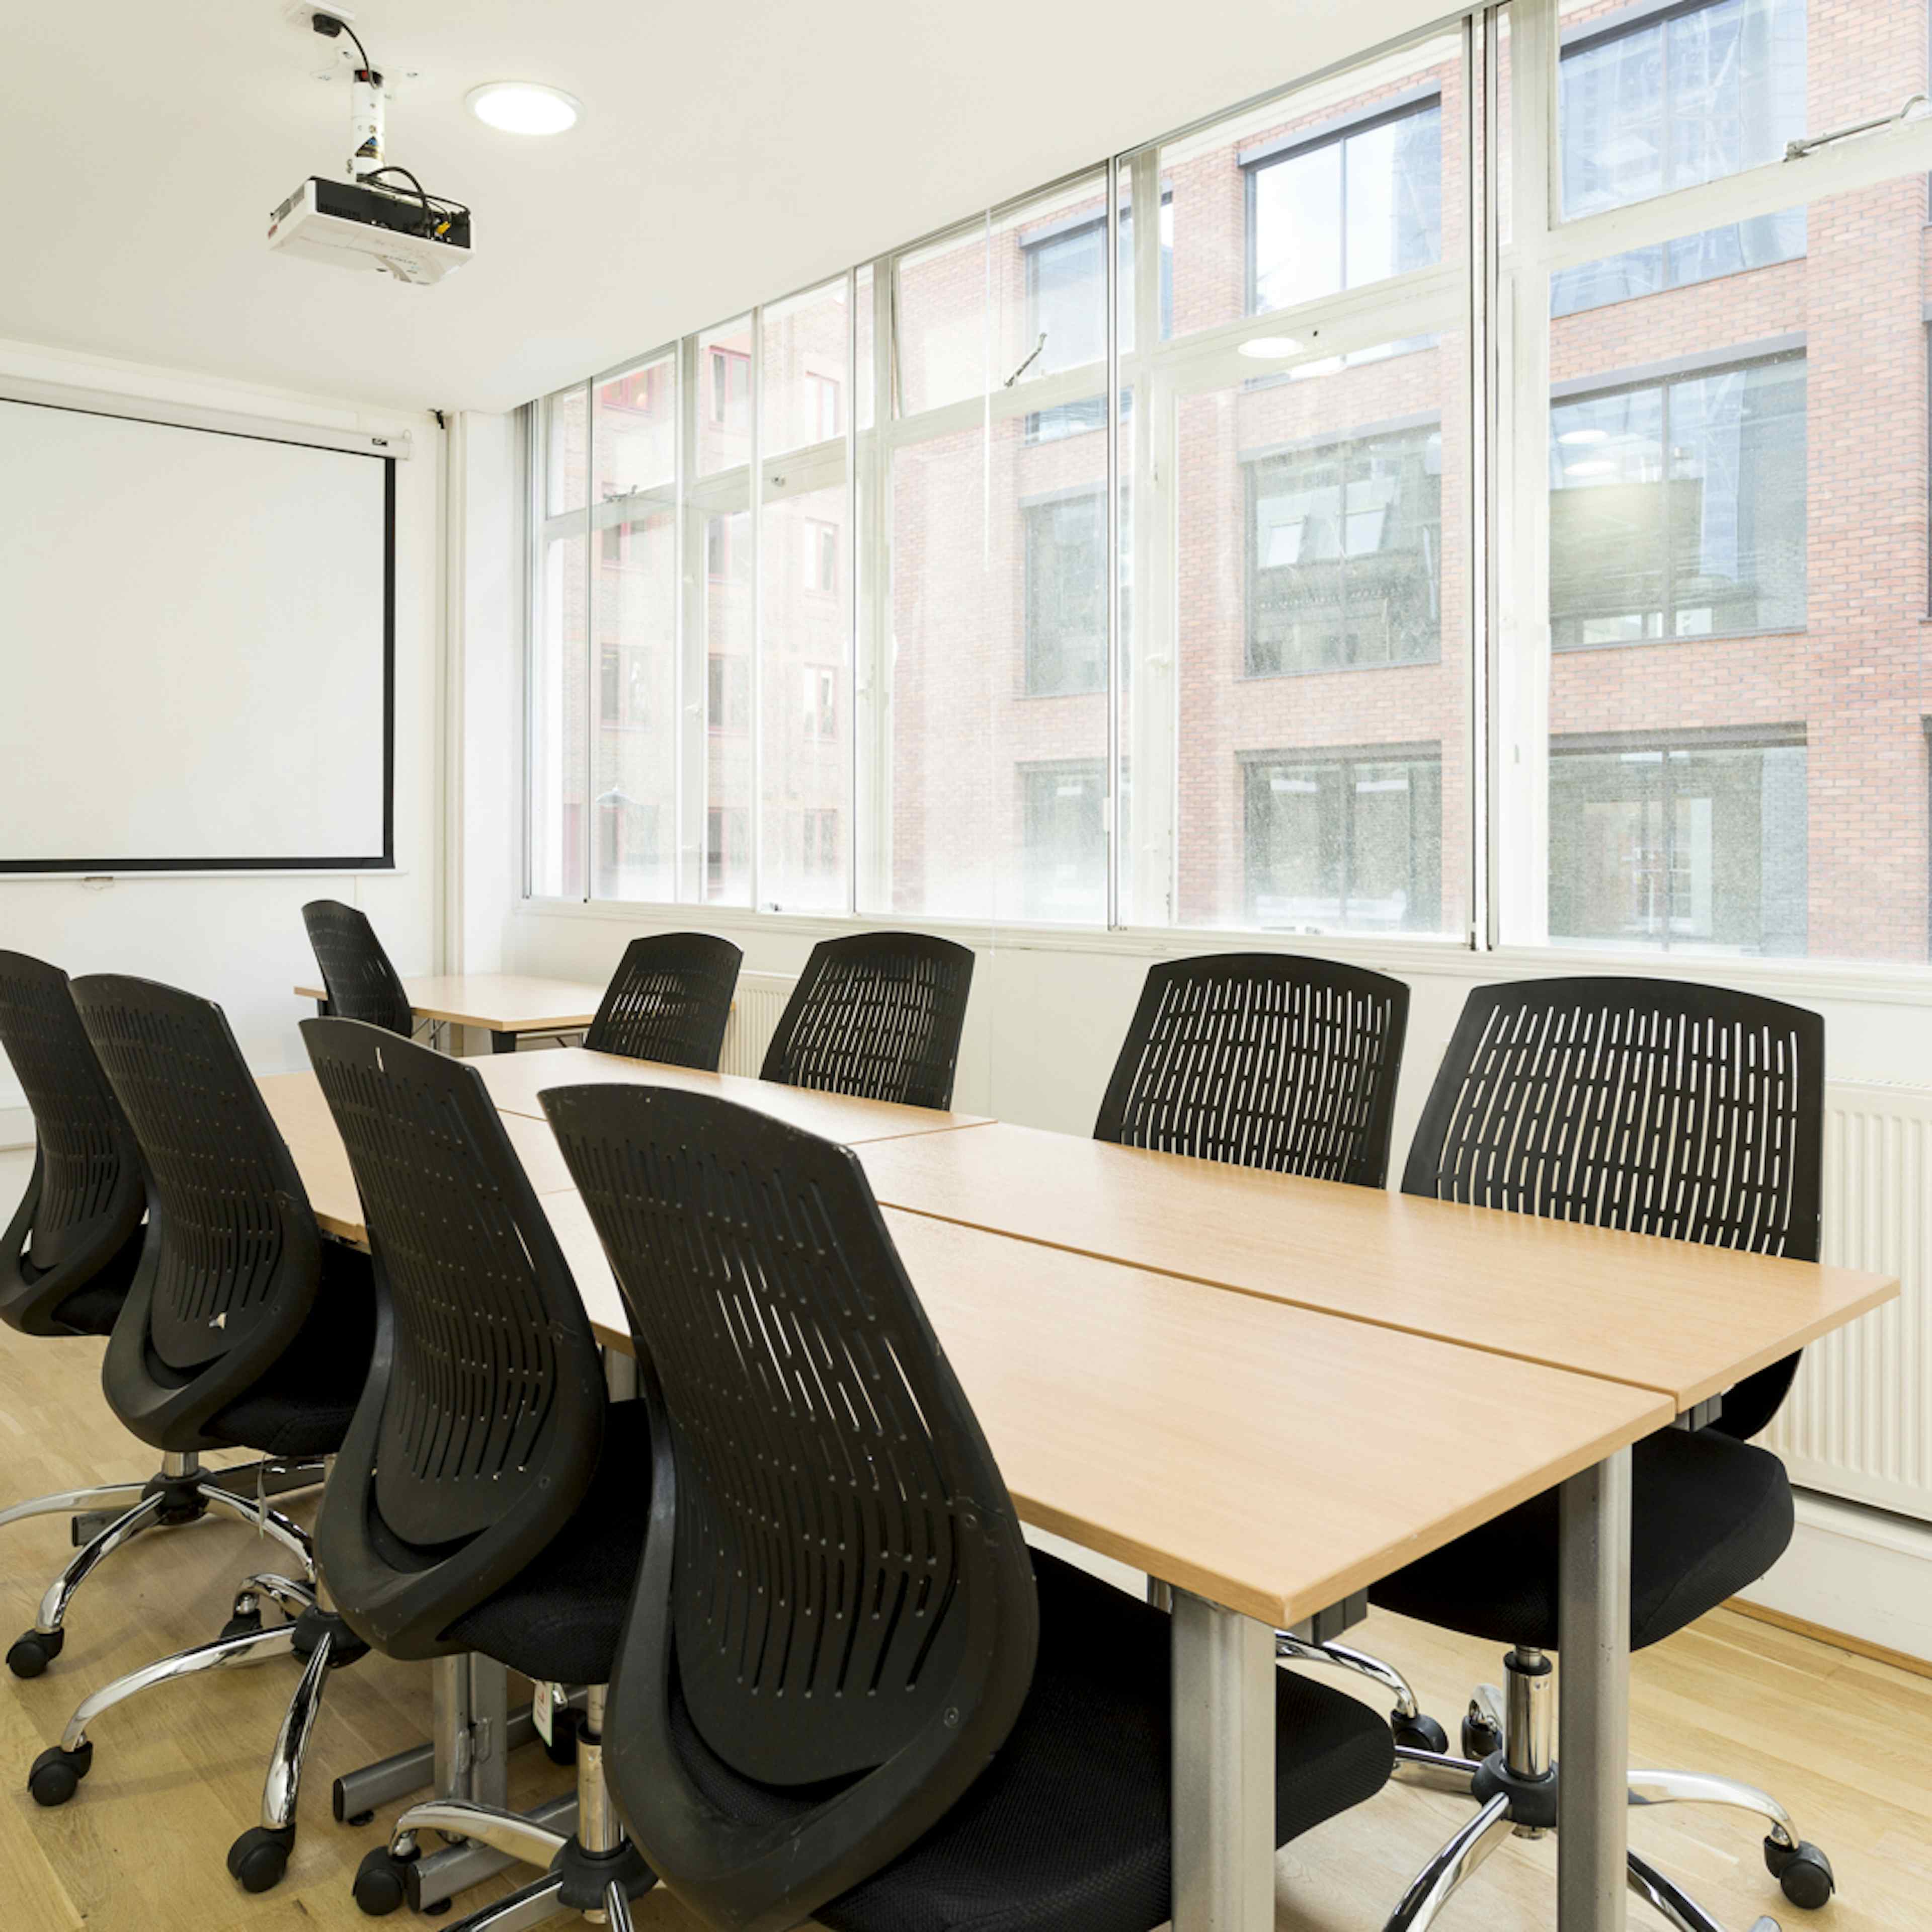 The Training Room Hire Company - Conference / Meeting Room (Small)  image 1